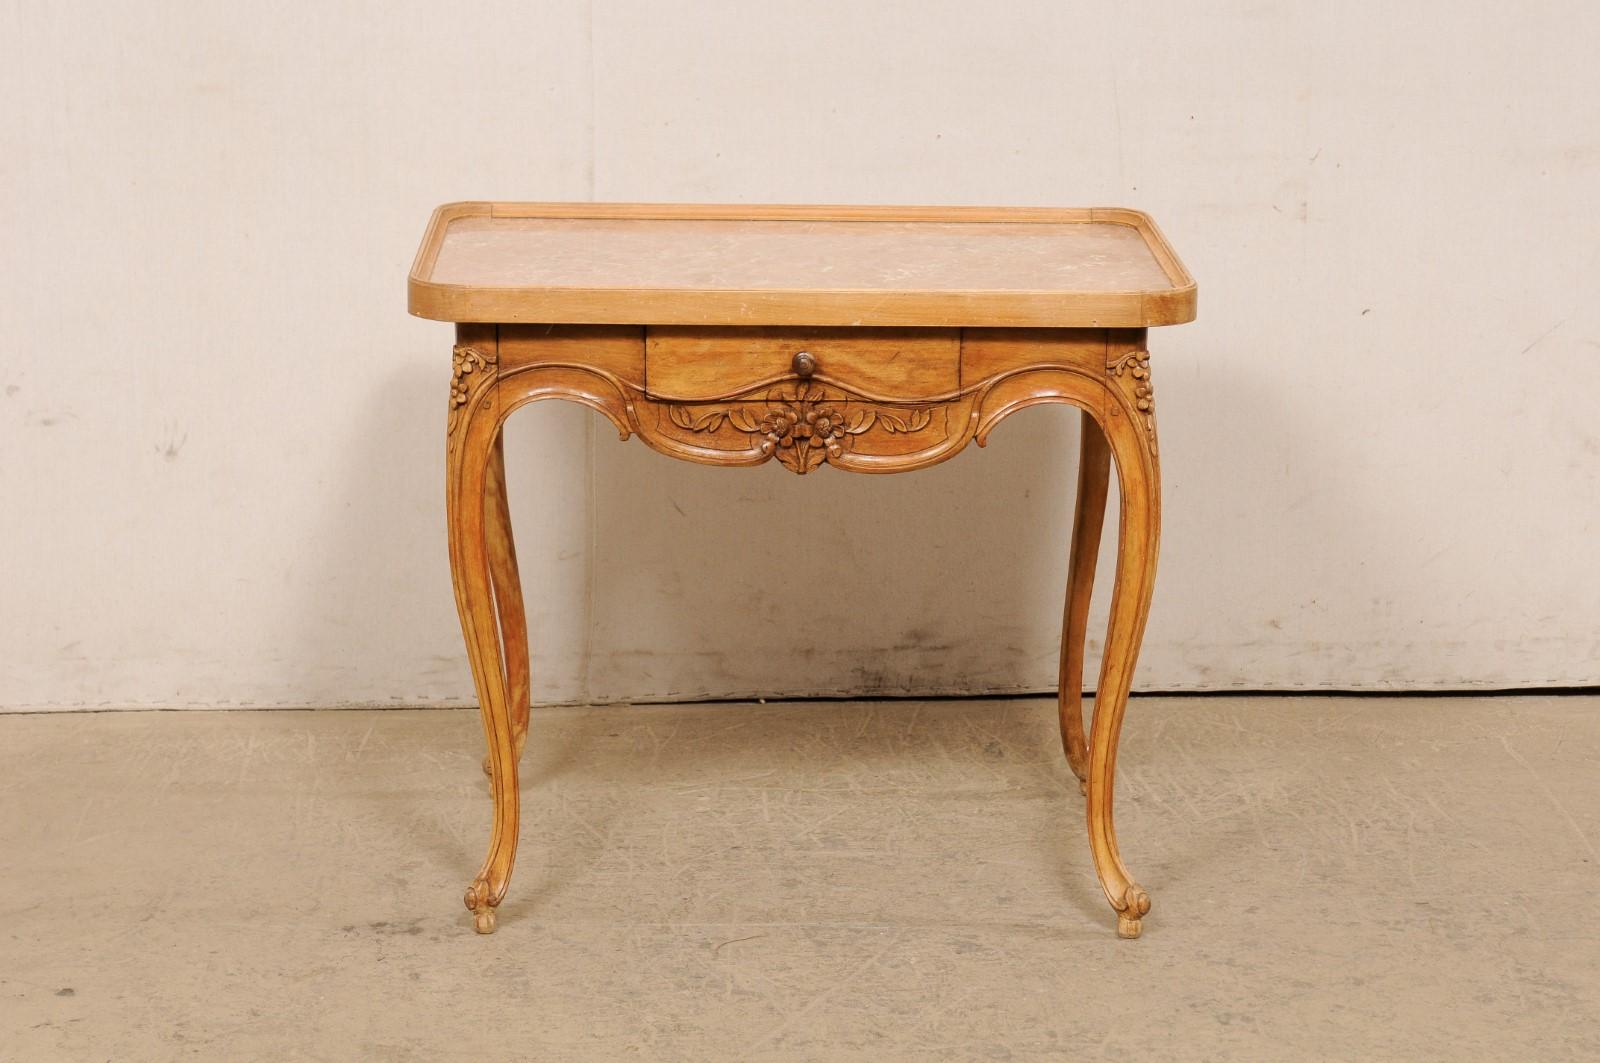 Late 18th Century French Marble-Top Carved-Wood Occasional Table with Drawer For Sale 2